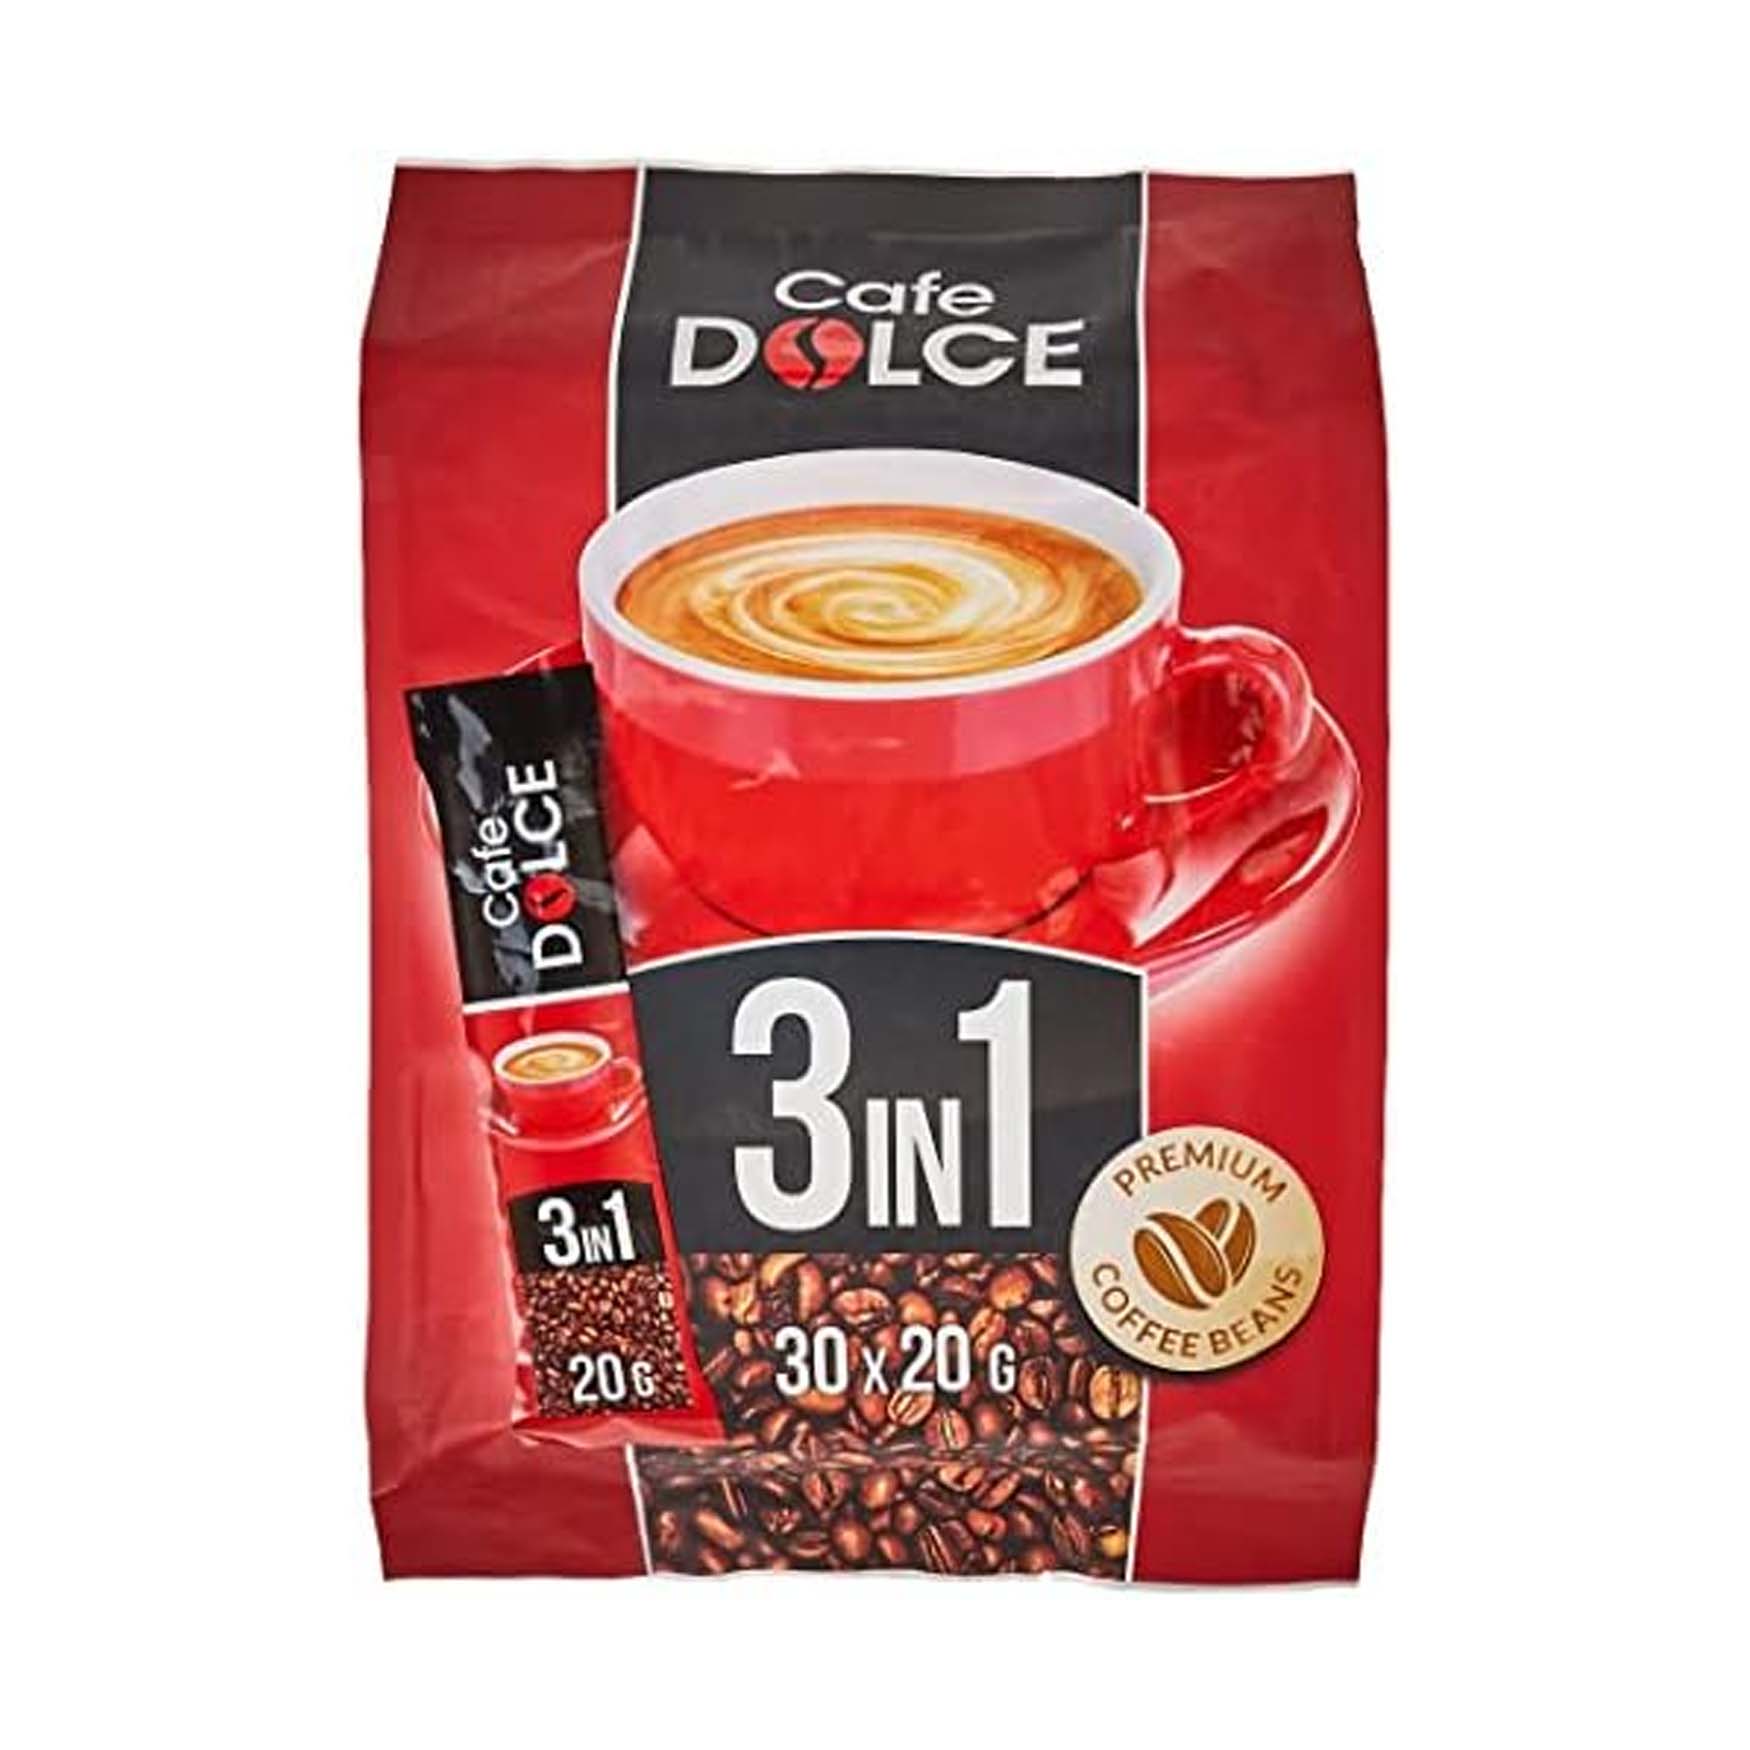 Cafe Dolce Premium Coffee Beans Packed in Small Sachets